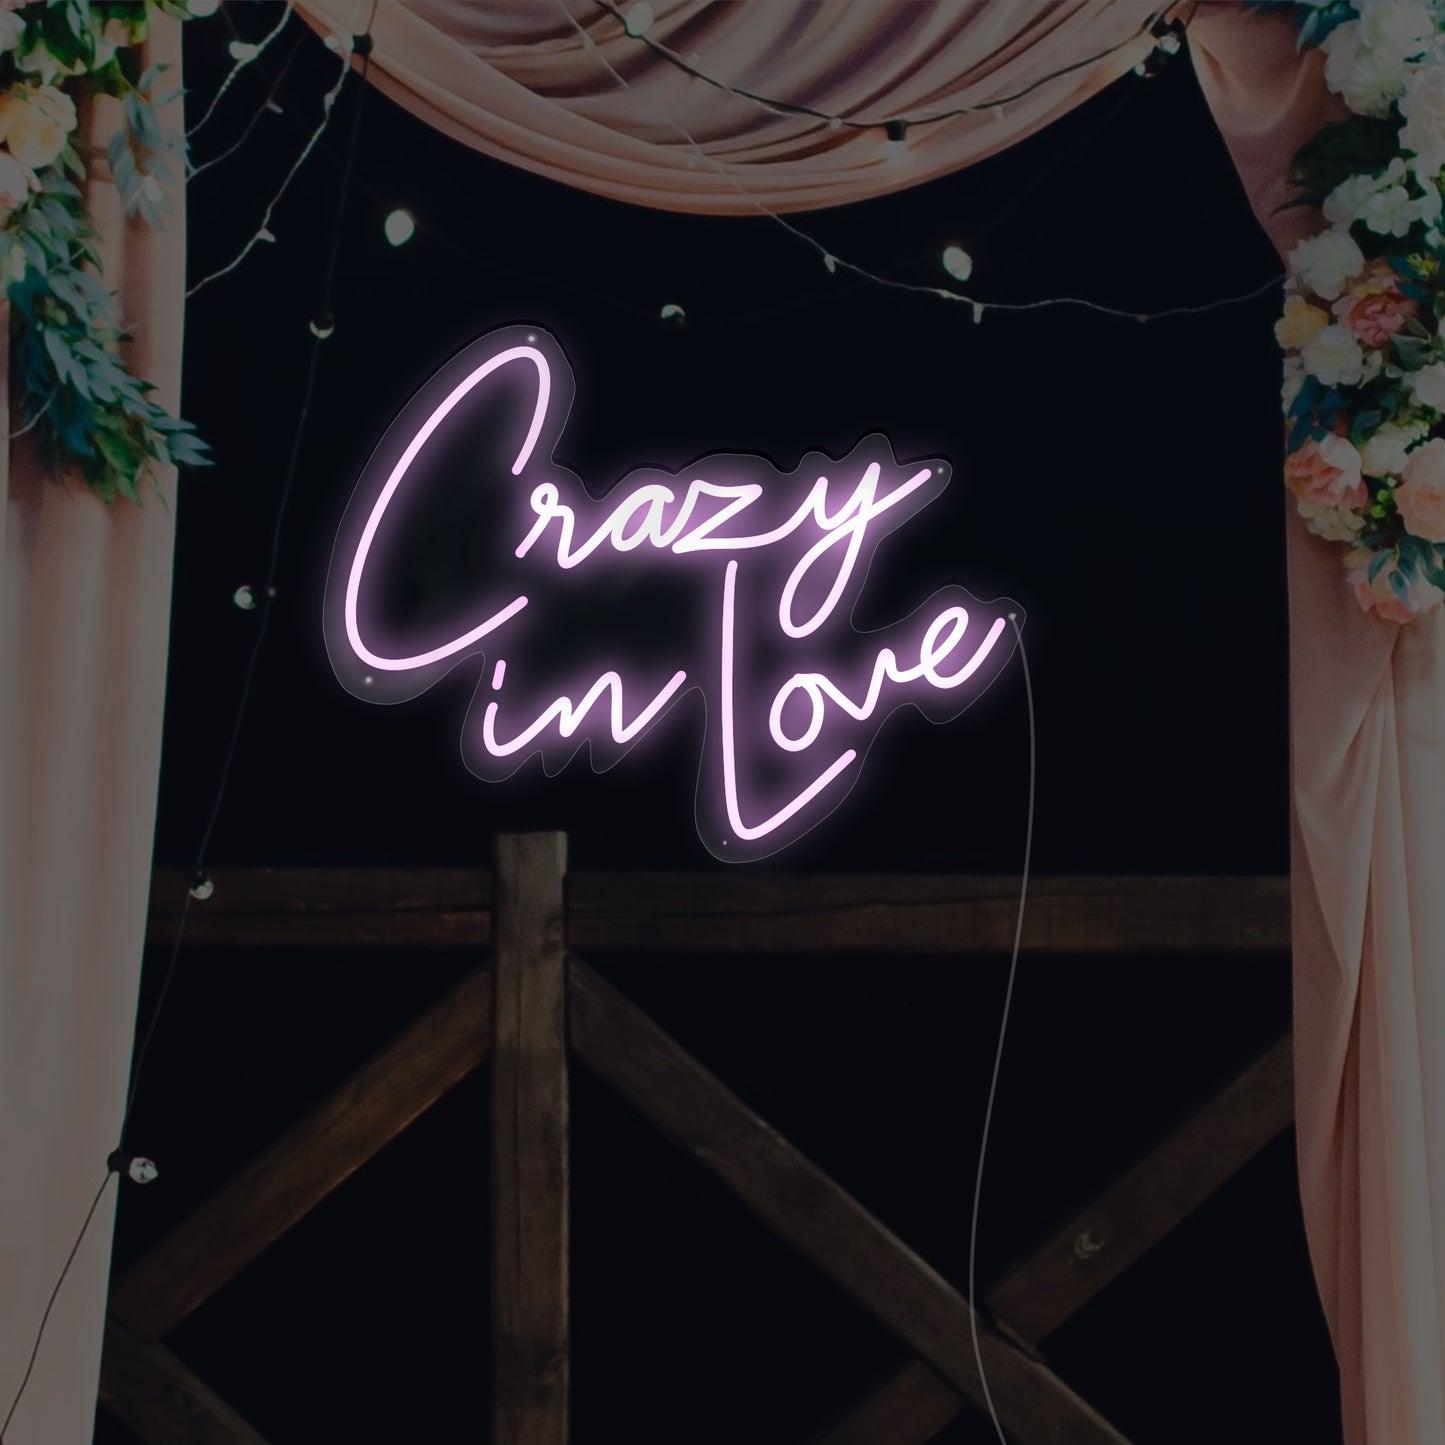 Crazy in Love' Neon Light, perfect for wedding celebrations and everlasting love